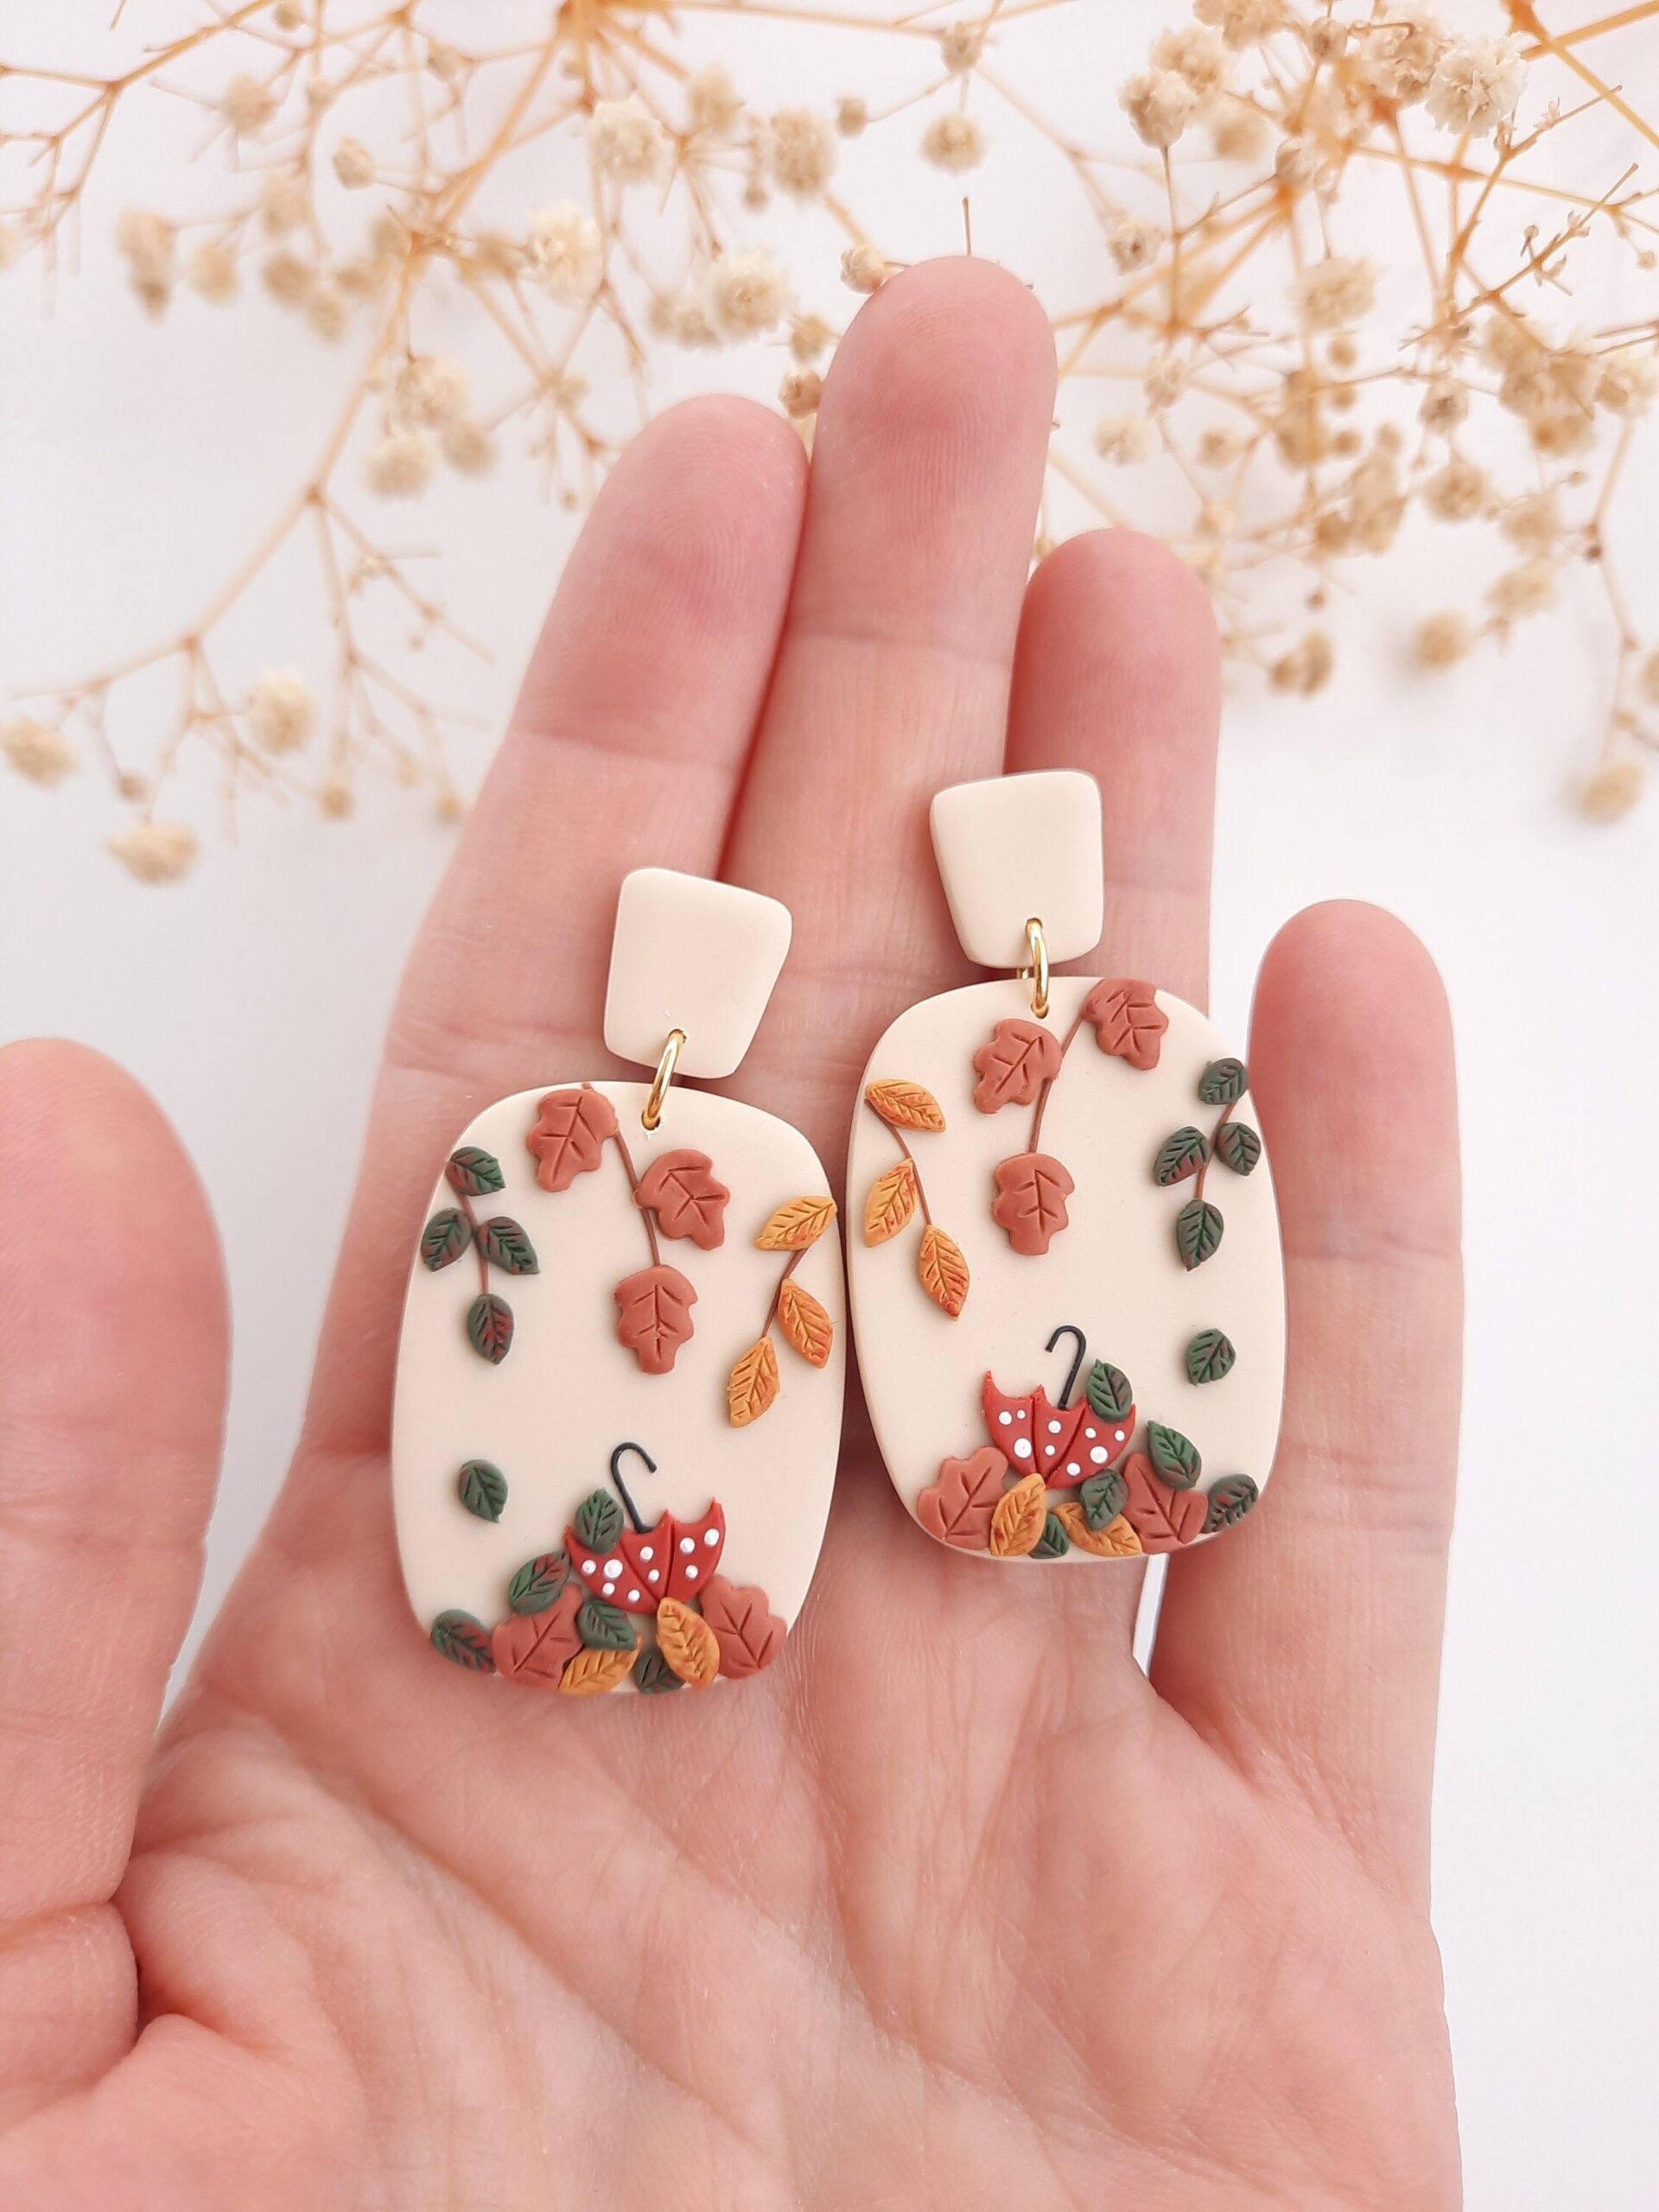 Autumn Leaves: The Perfect Earrings for
Fall